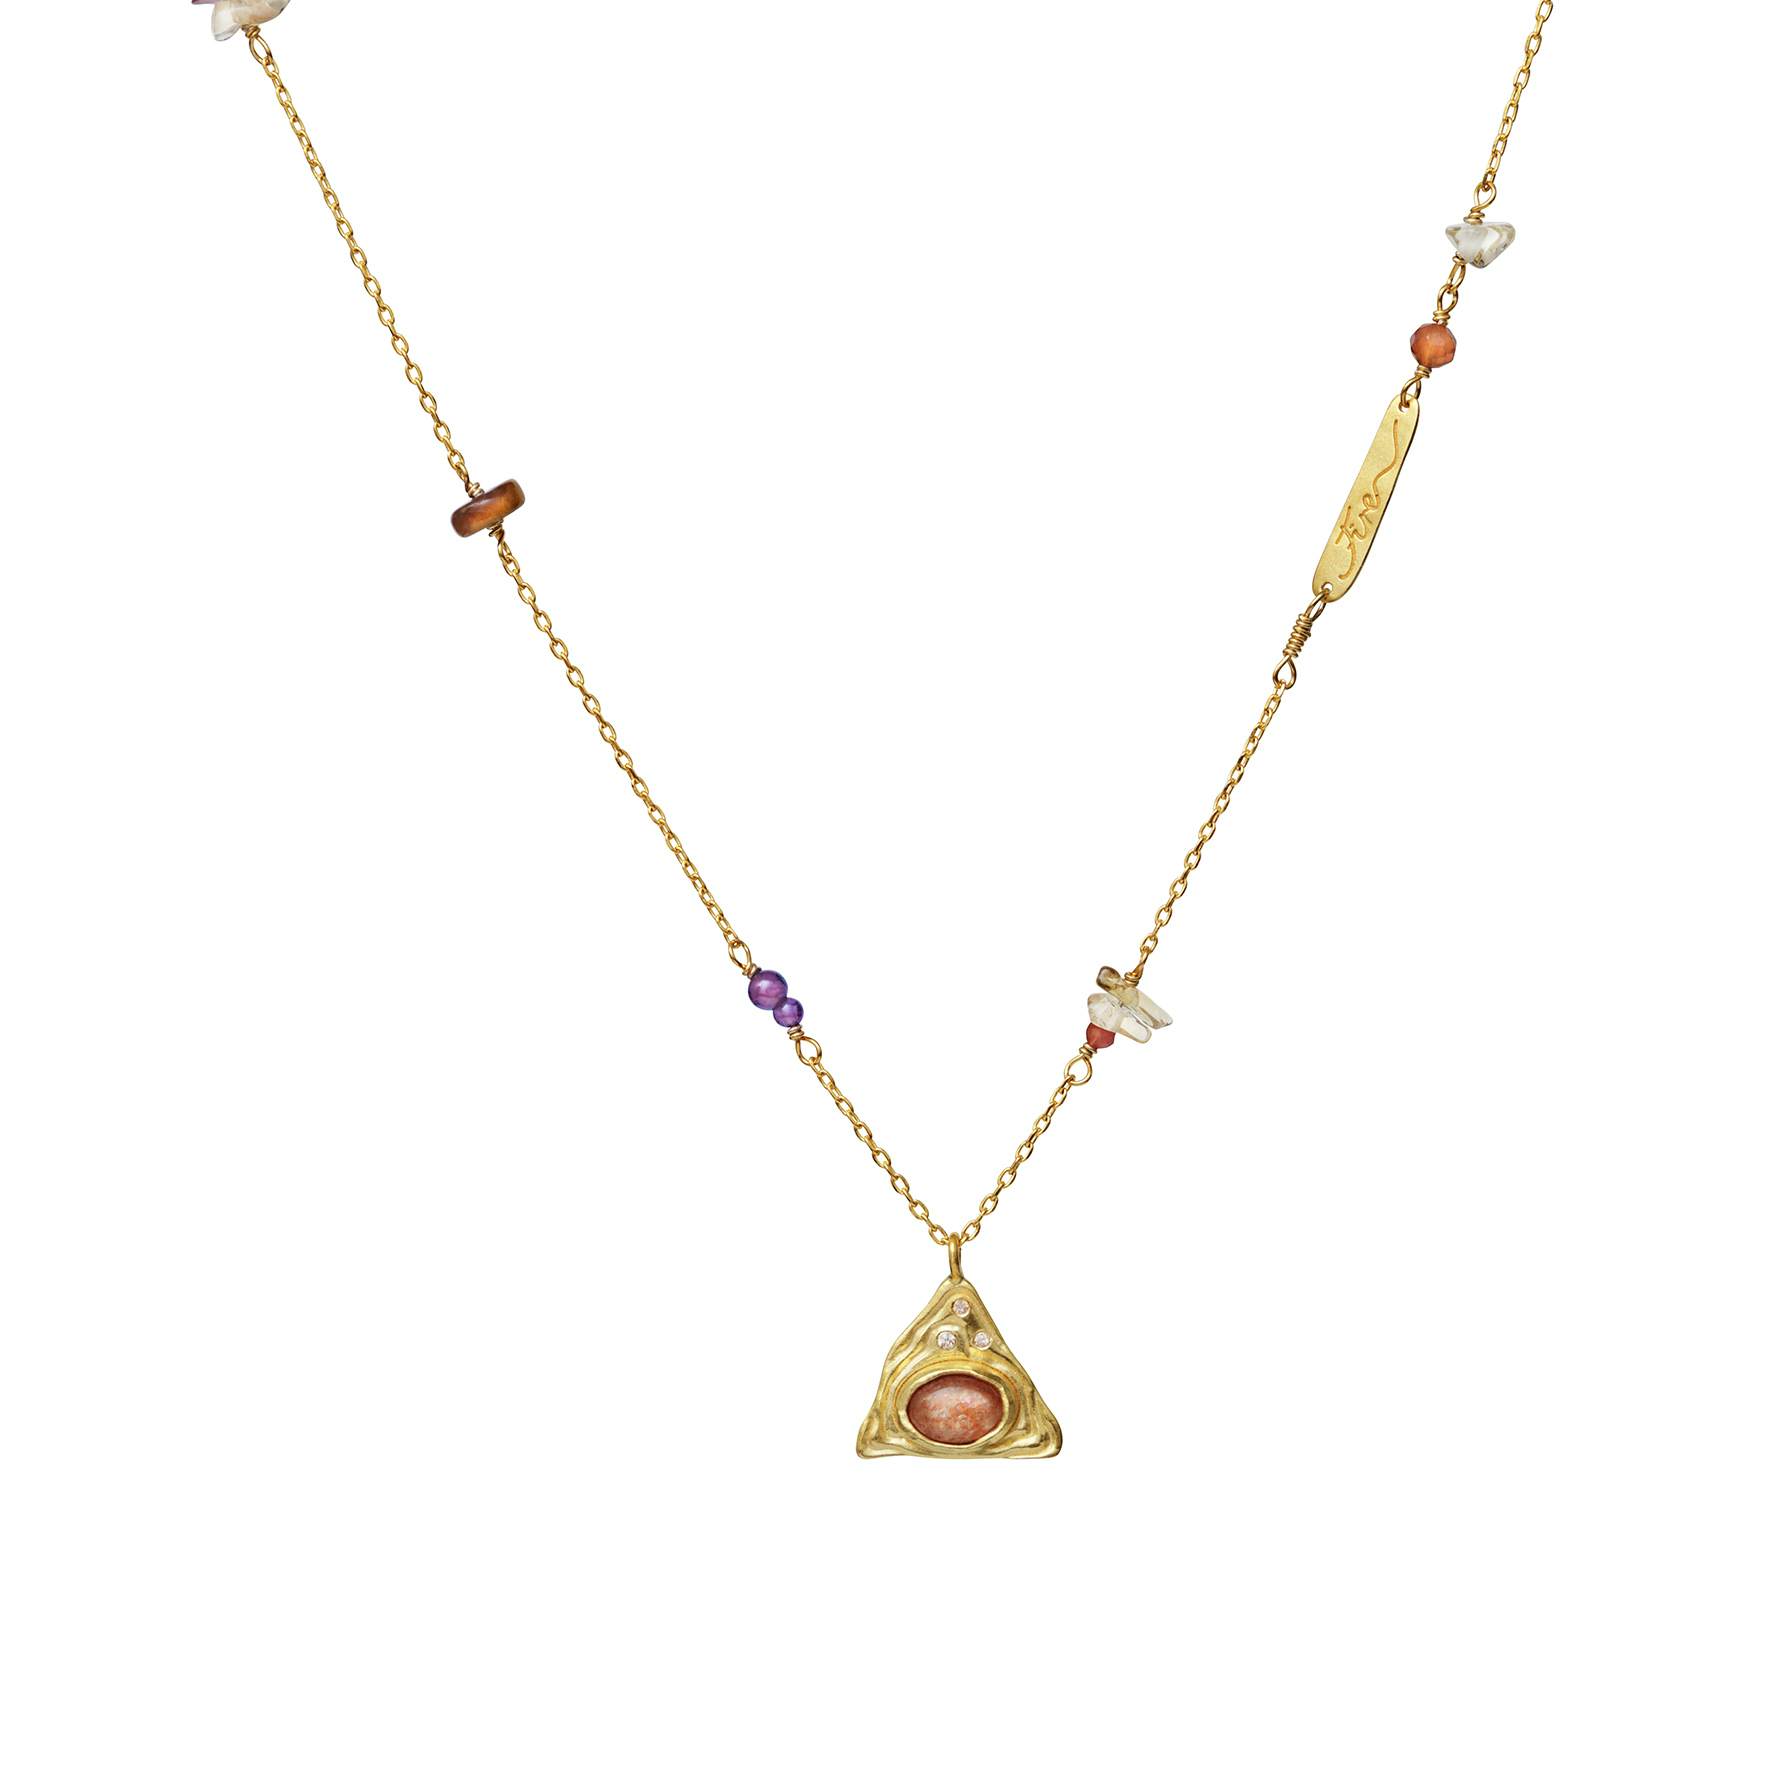 Calida Fire Necklace from Maanesten in Goldplated-Silver Sterling 925